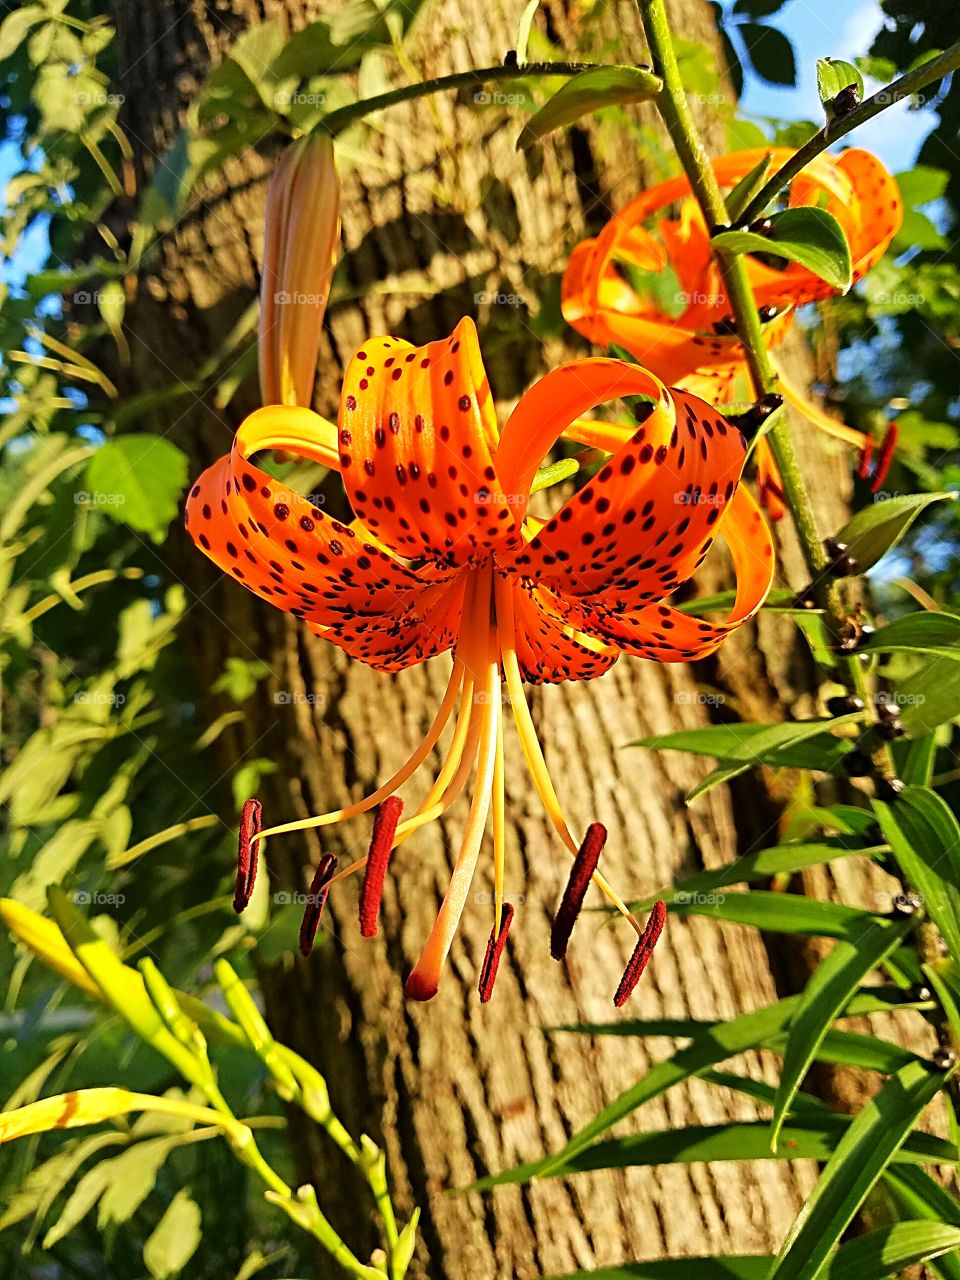 tiger lily at sunset